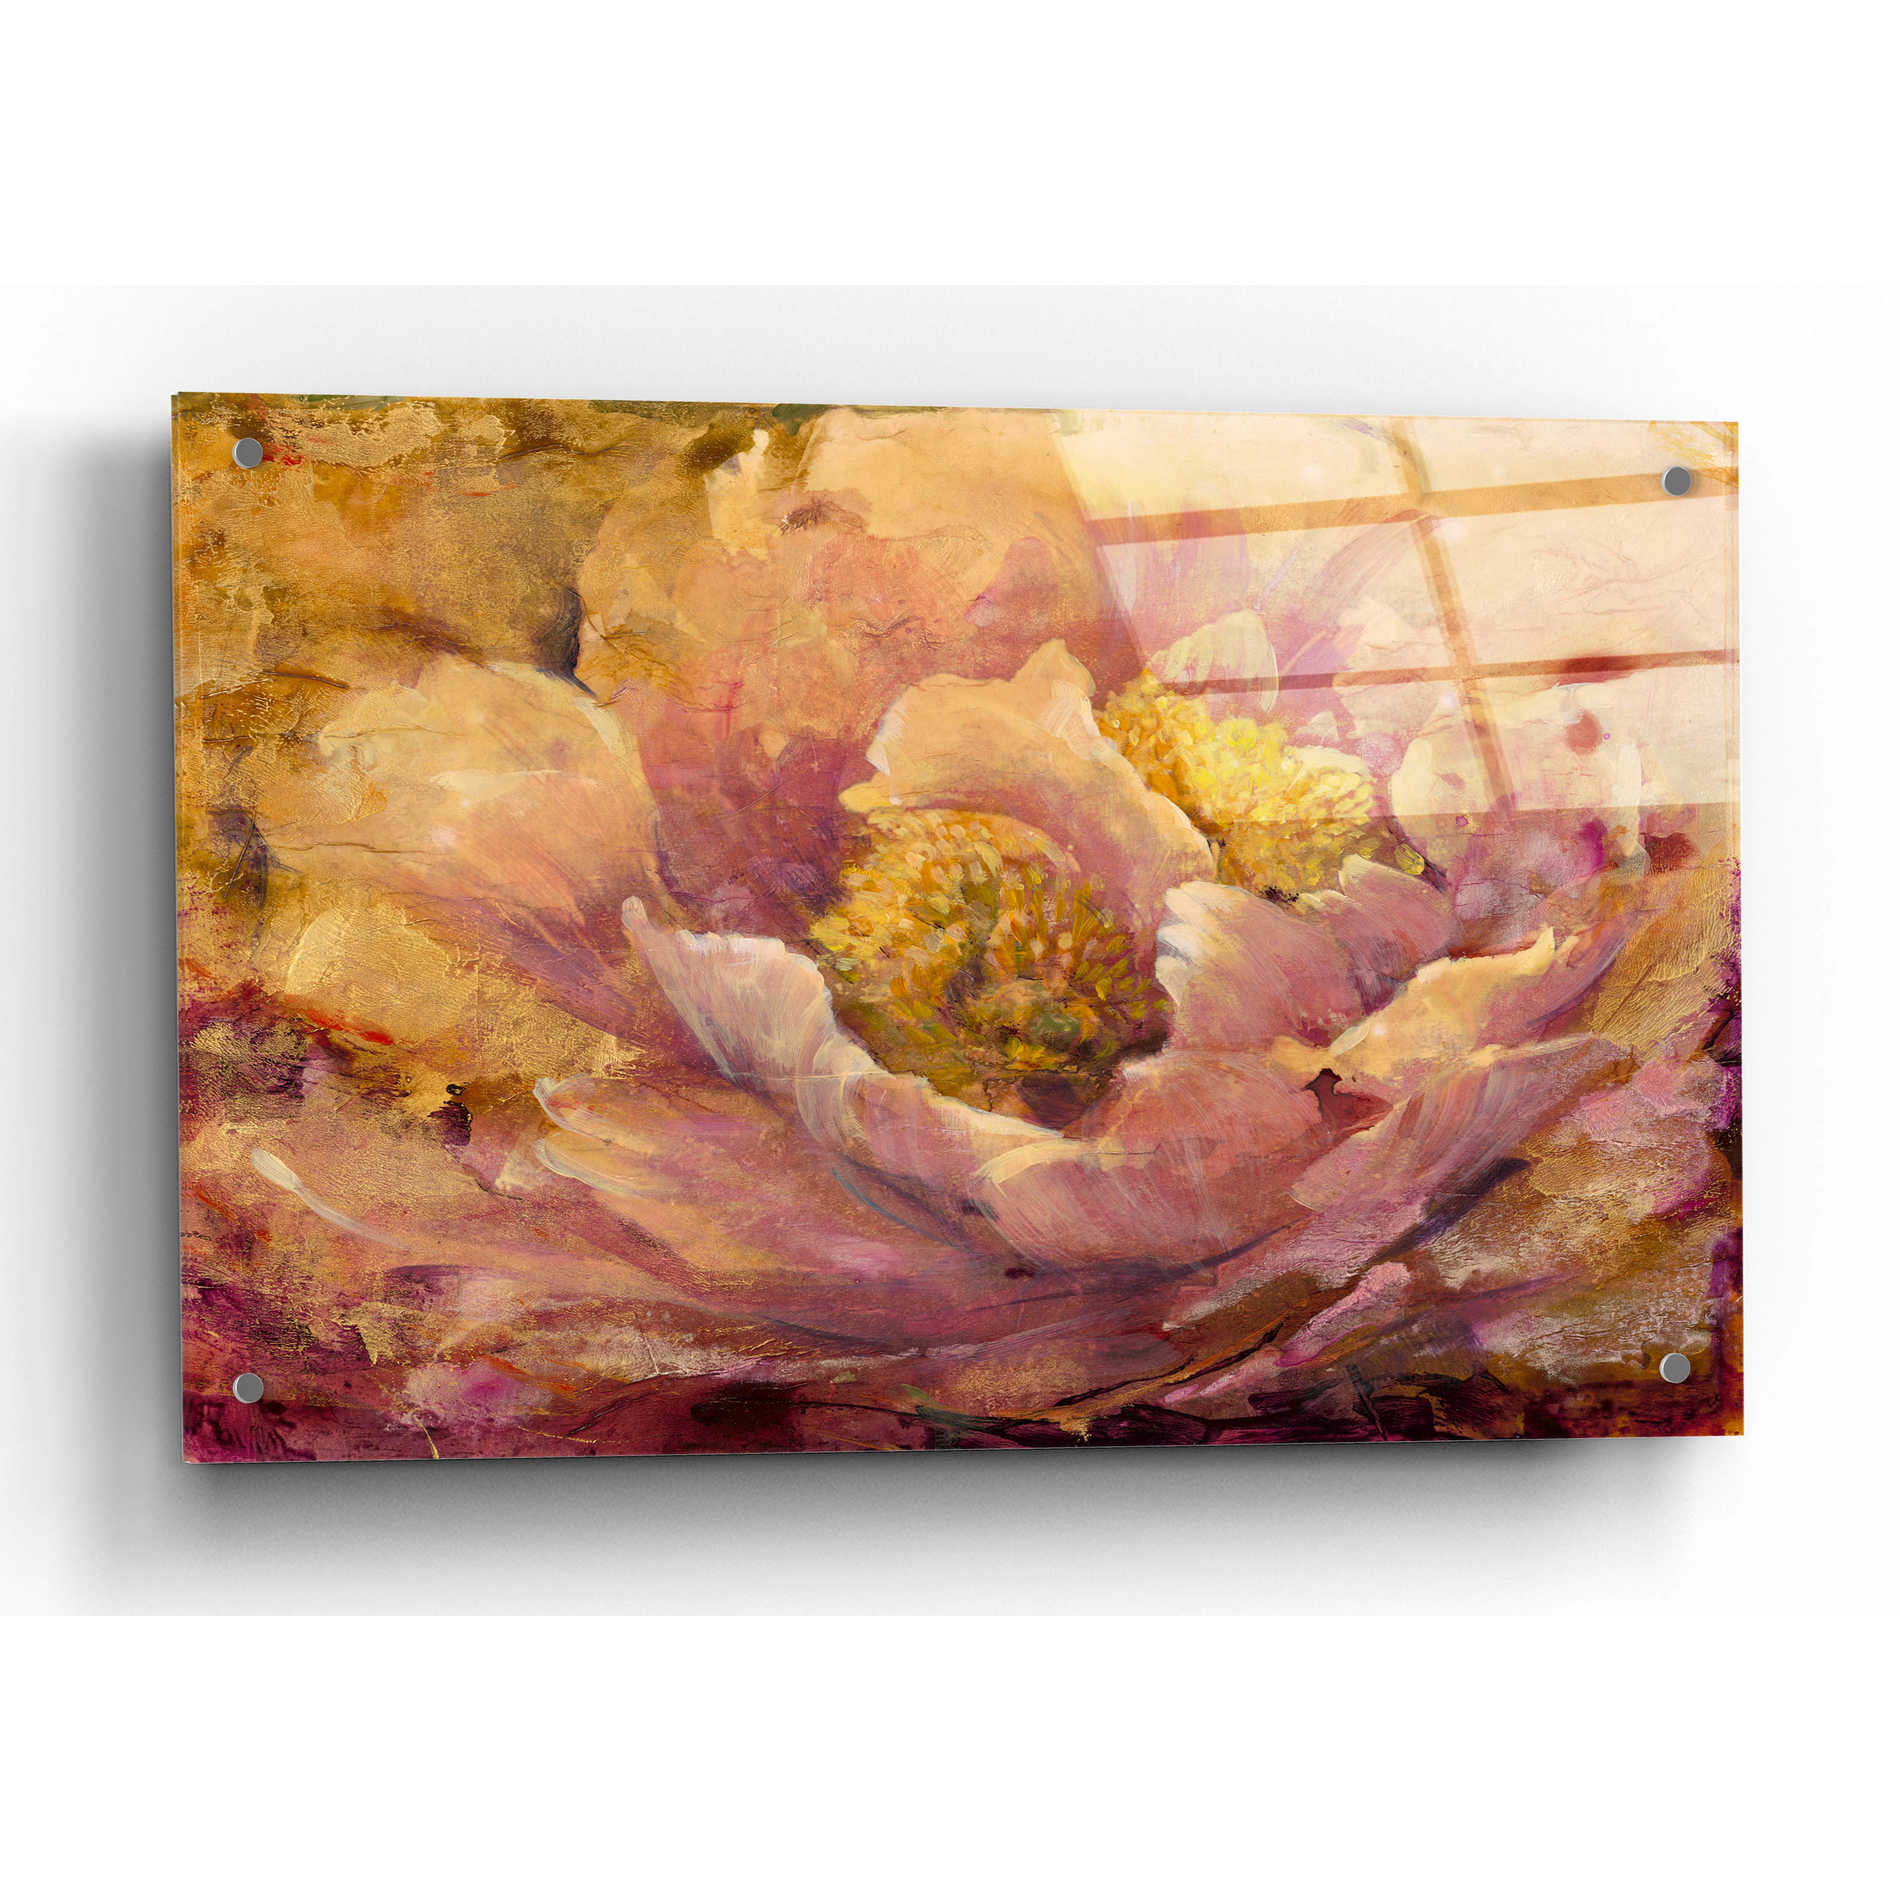 Epic Art 'Floral in Bloom I' by Tim O'Toole, Acrylic Glass Wall Art,36x24